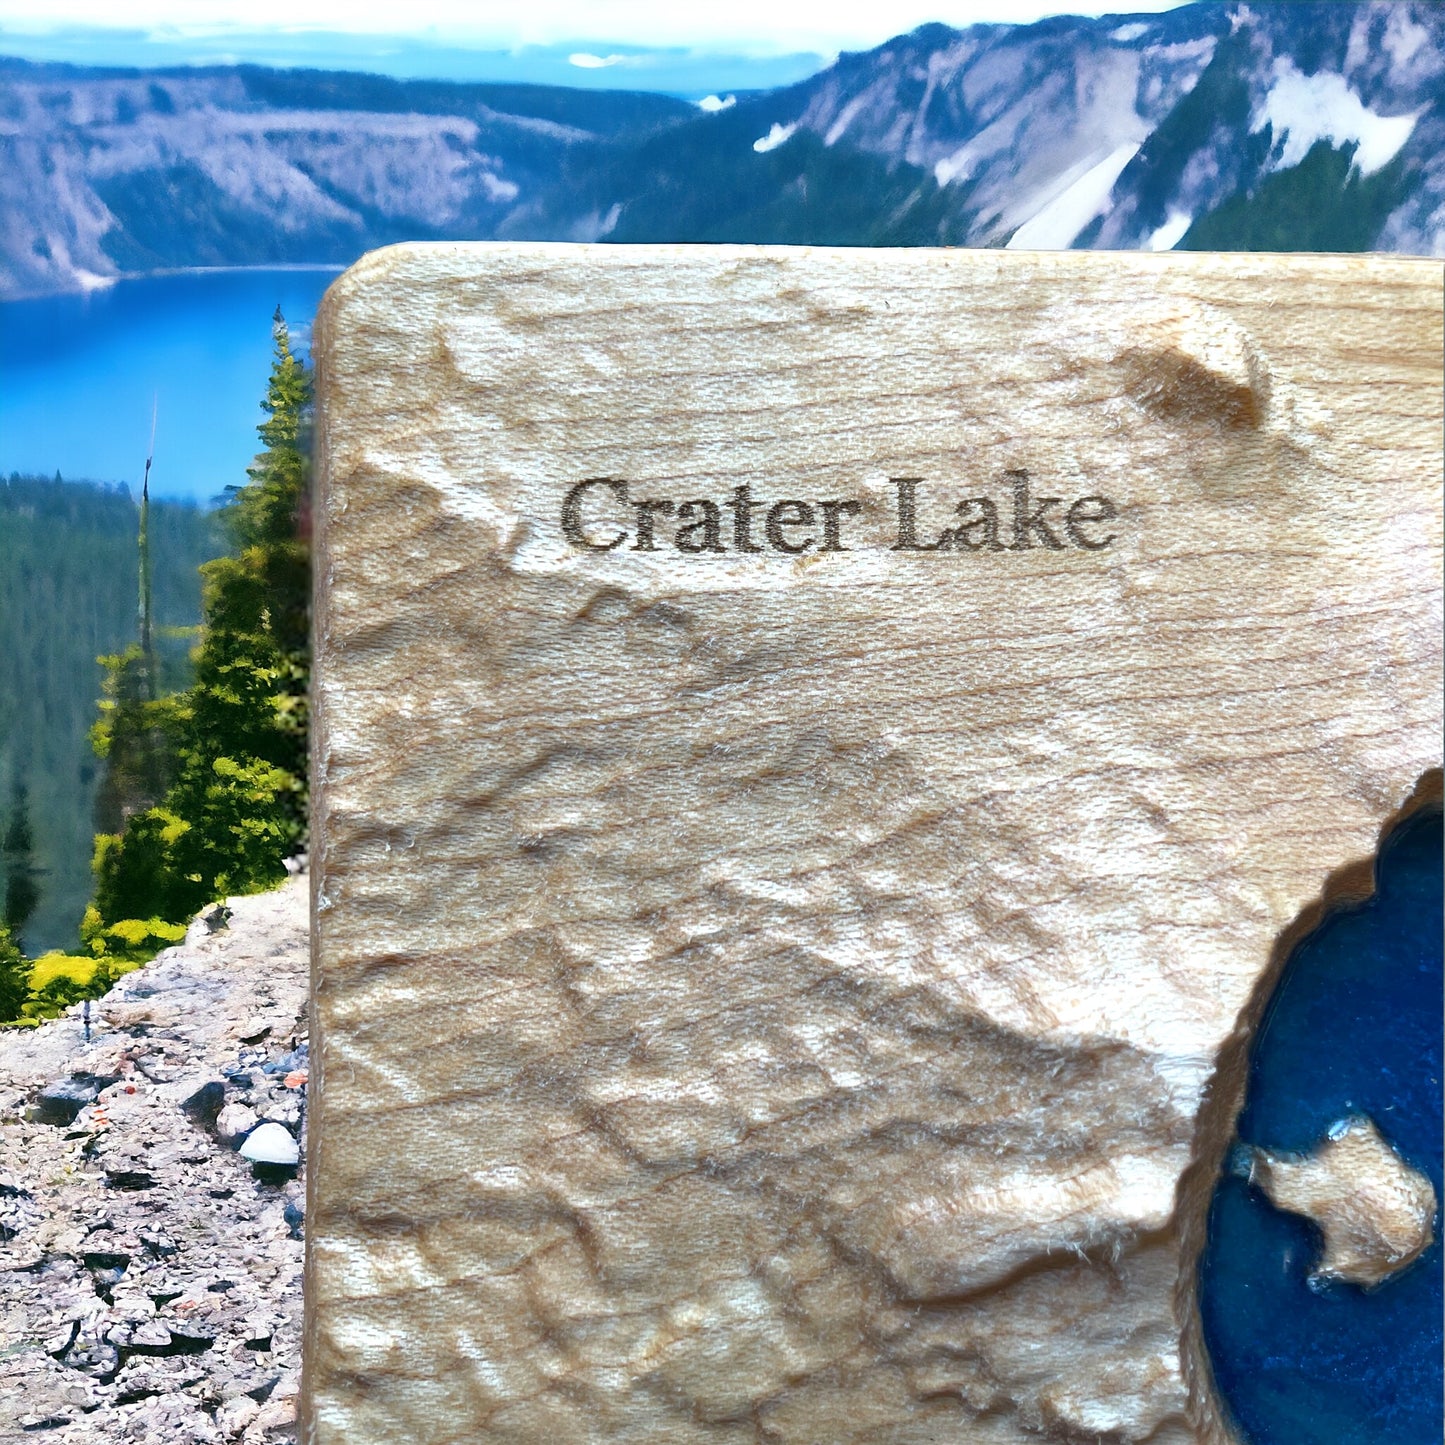 Crater Lake 3D Relief Map | Crater Lake Wood Epoxy Art | Crater Lake National Park Oregon | Travel Gift | Gift for Him | Crater Lake Gift